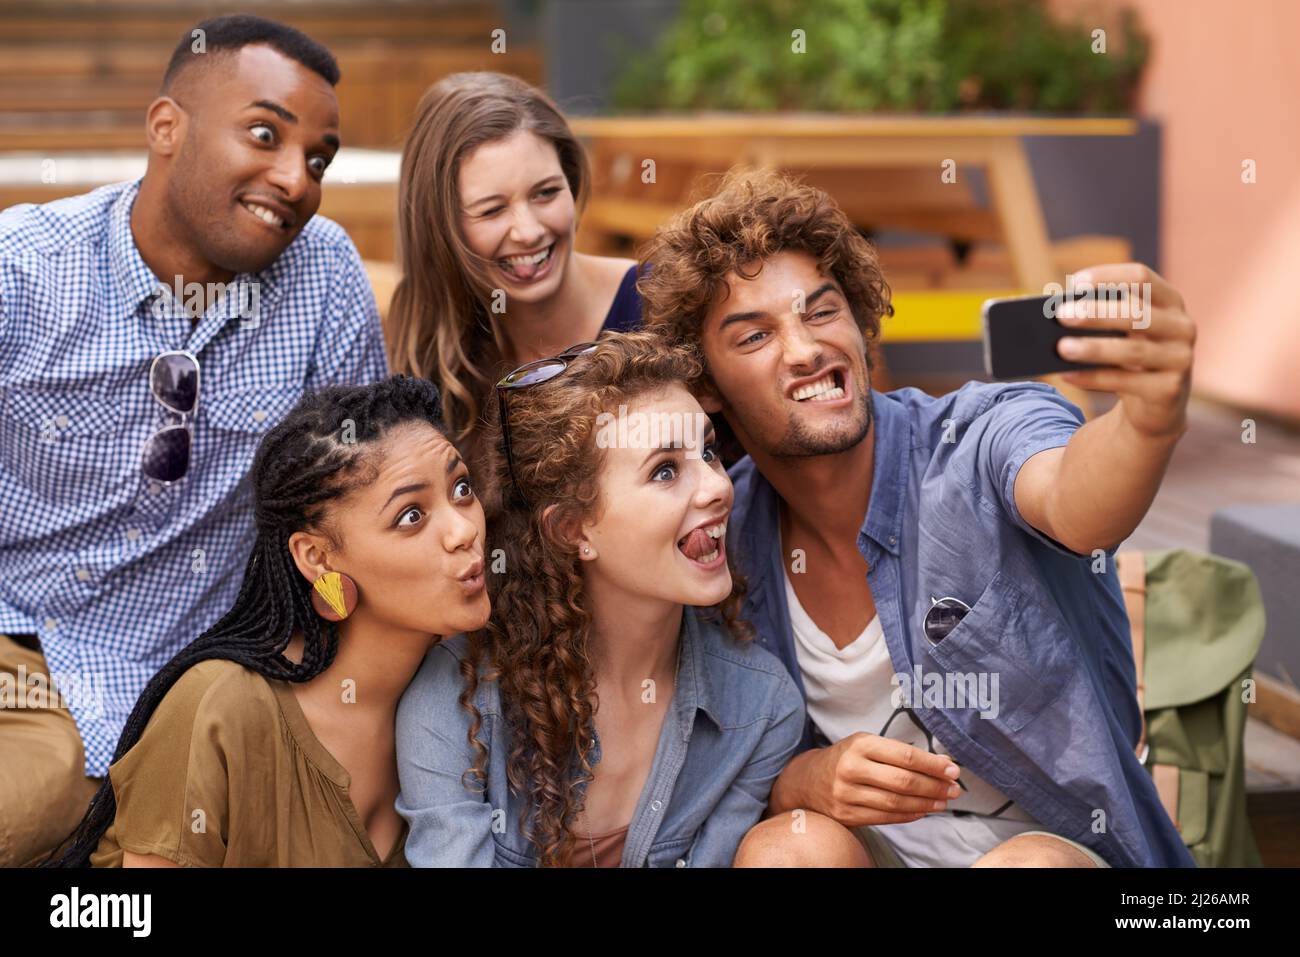 All aboard the Selfie express. A group shot of university students having fun at campus. Stock Photo